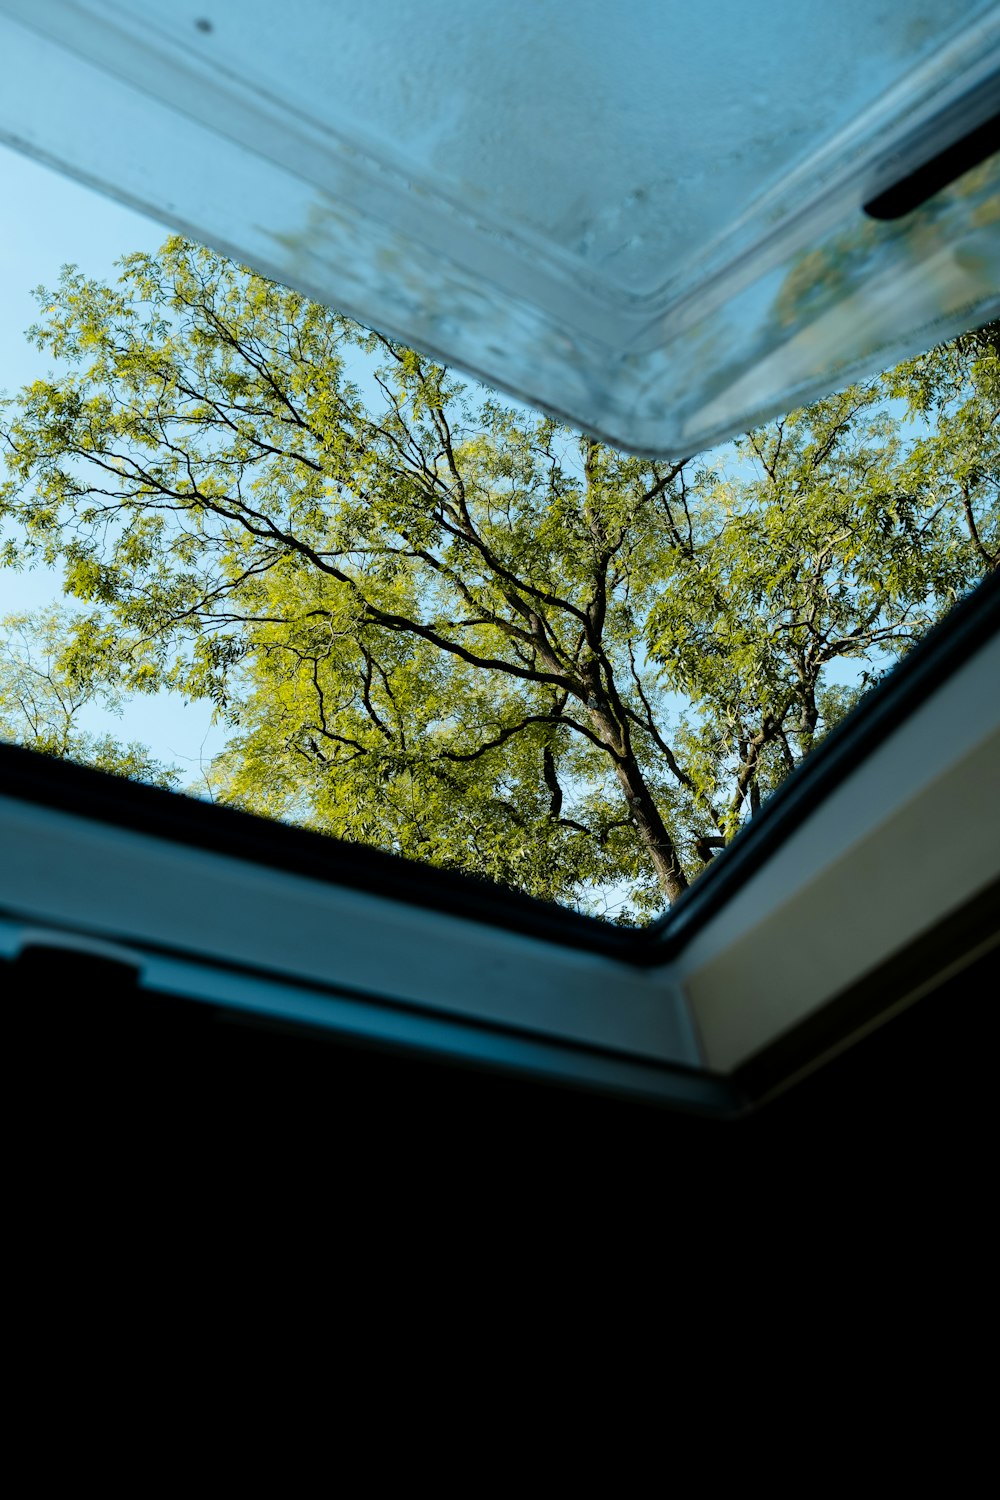 a view of a tree from inside a window